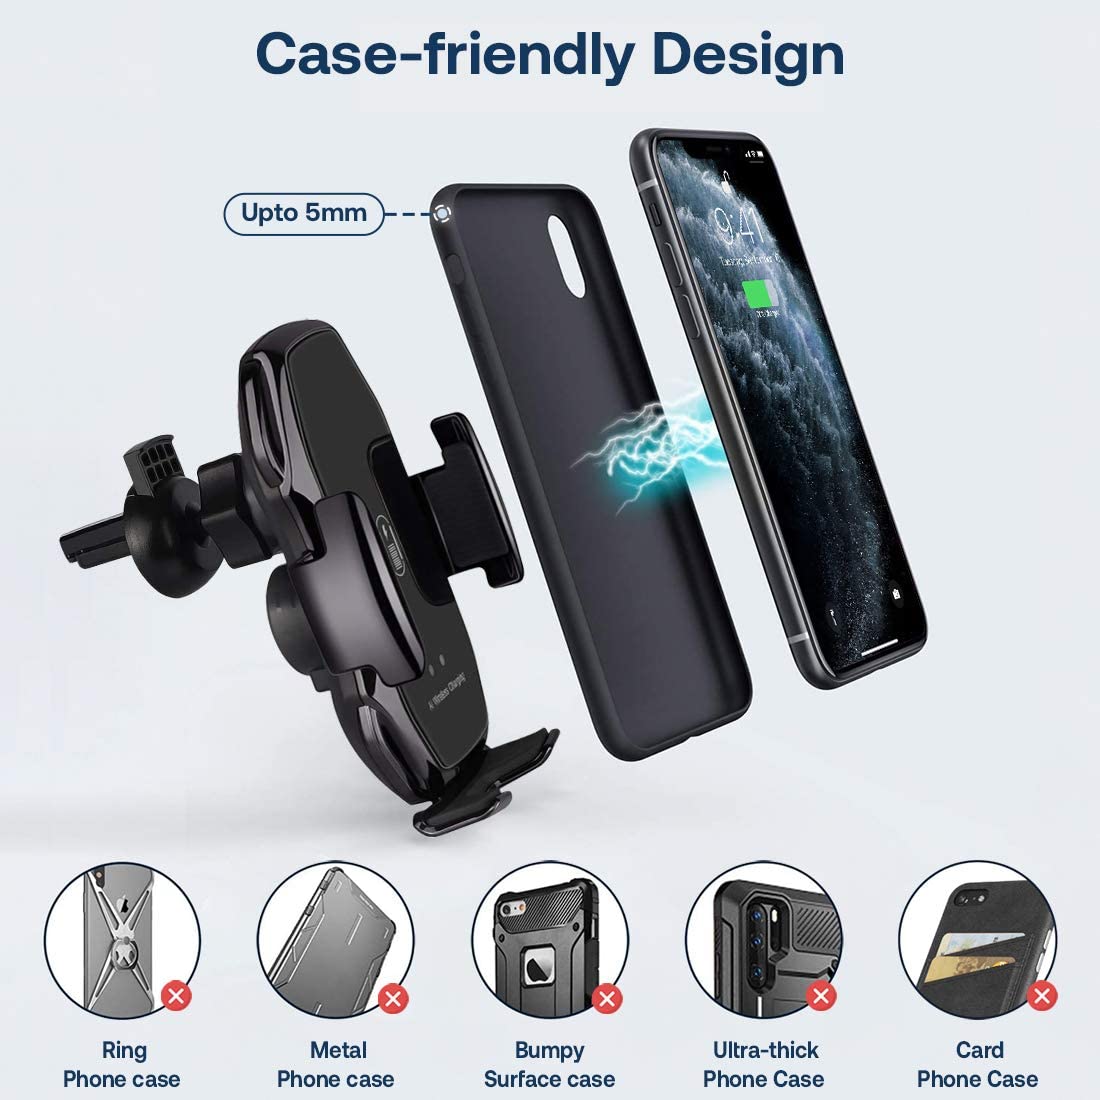 ULTRICS Wireless Car Charger, 2 in 1 10W Fast Charging In Car Wireless Charger Mount Phone Holder Compatible with iPhone 12 Pro Max/ 11/ XS/ XR, Galaxy S21 Ultra/ S20+/ S10/ S9/ S8 Plus, Note 20/10/9